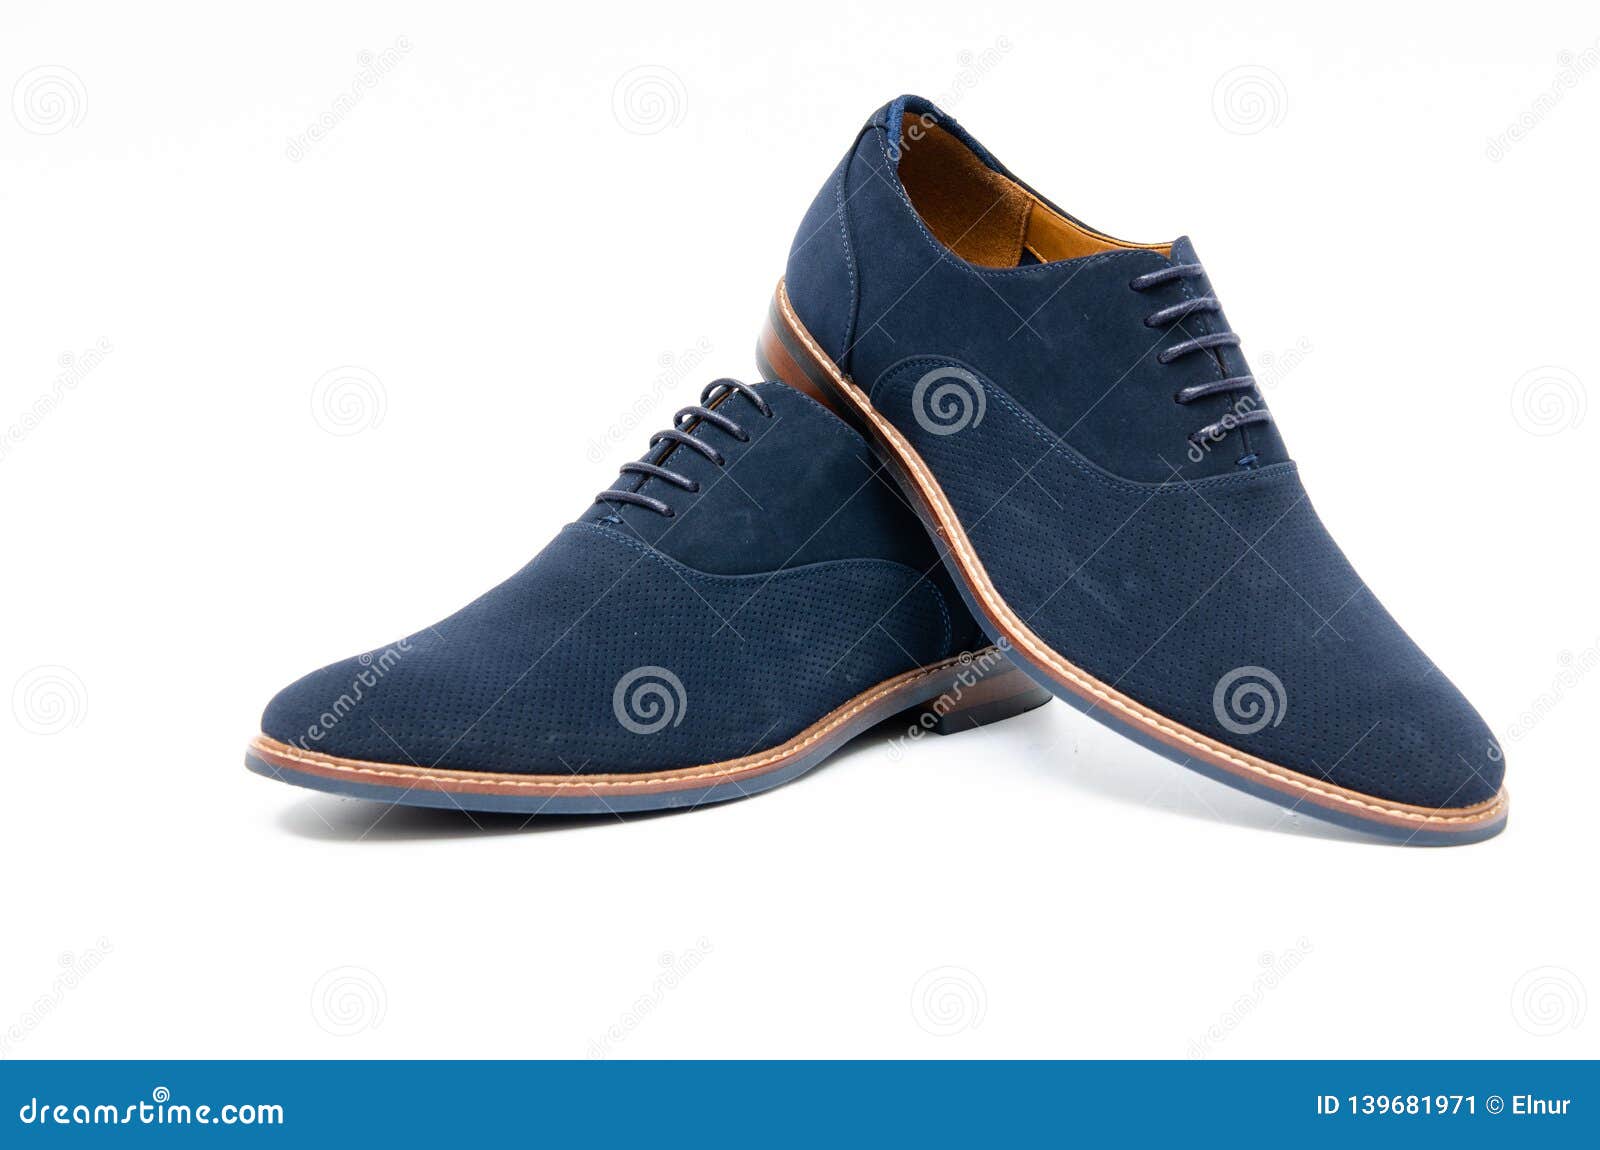 The Blue Suede Shoes on White Background Stock Image - Image of monk ...